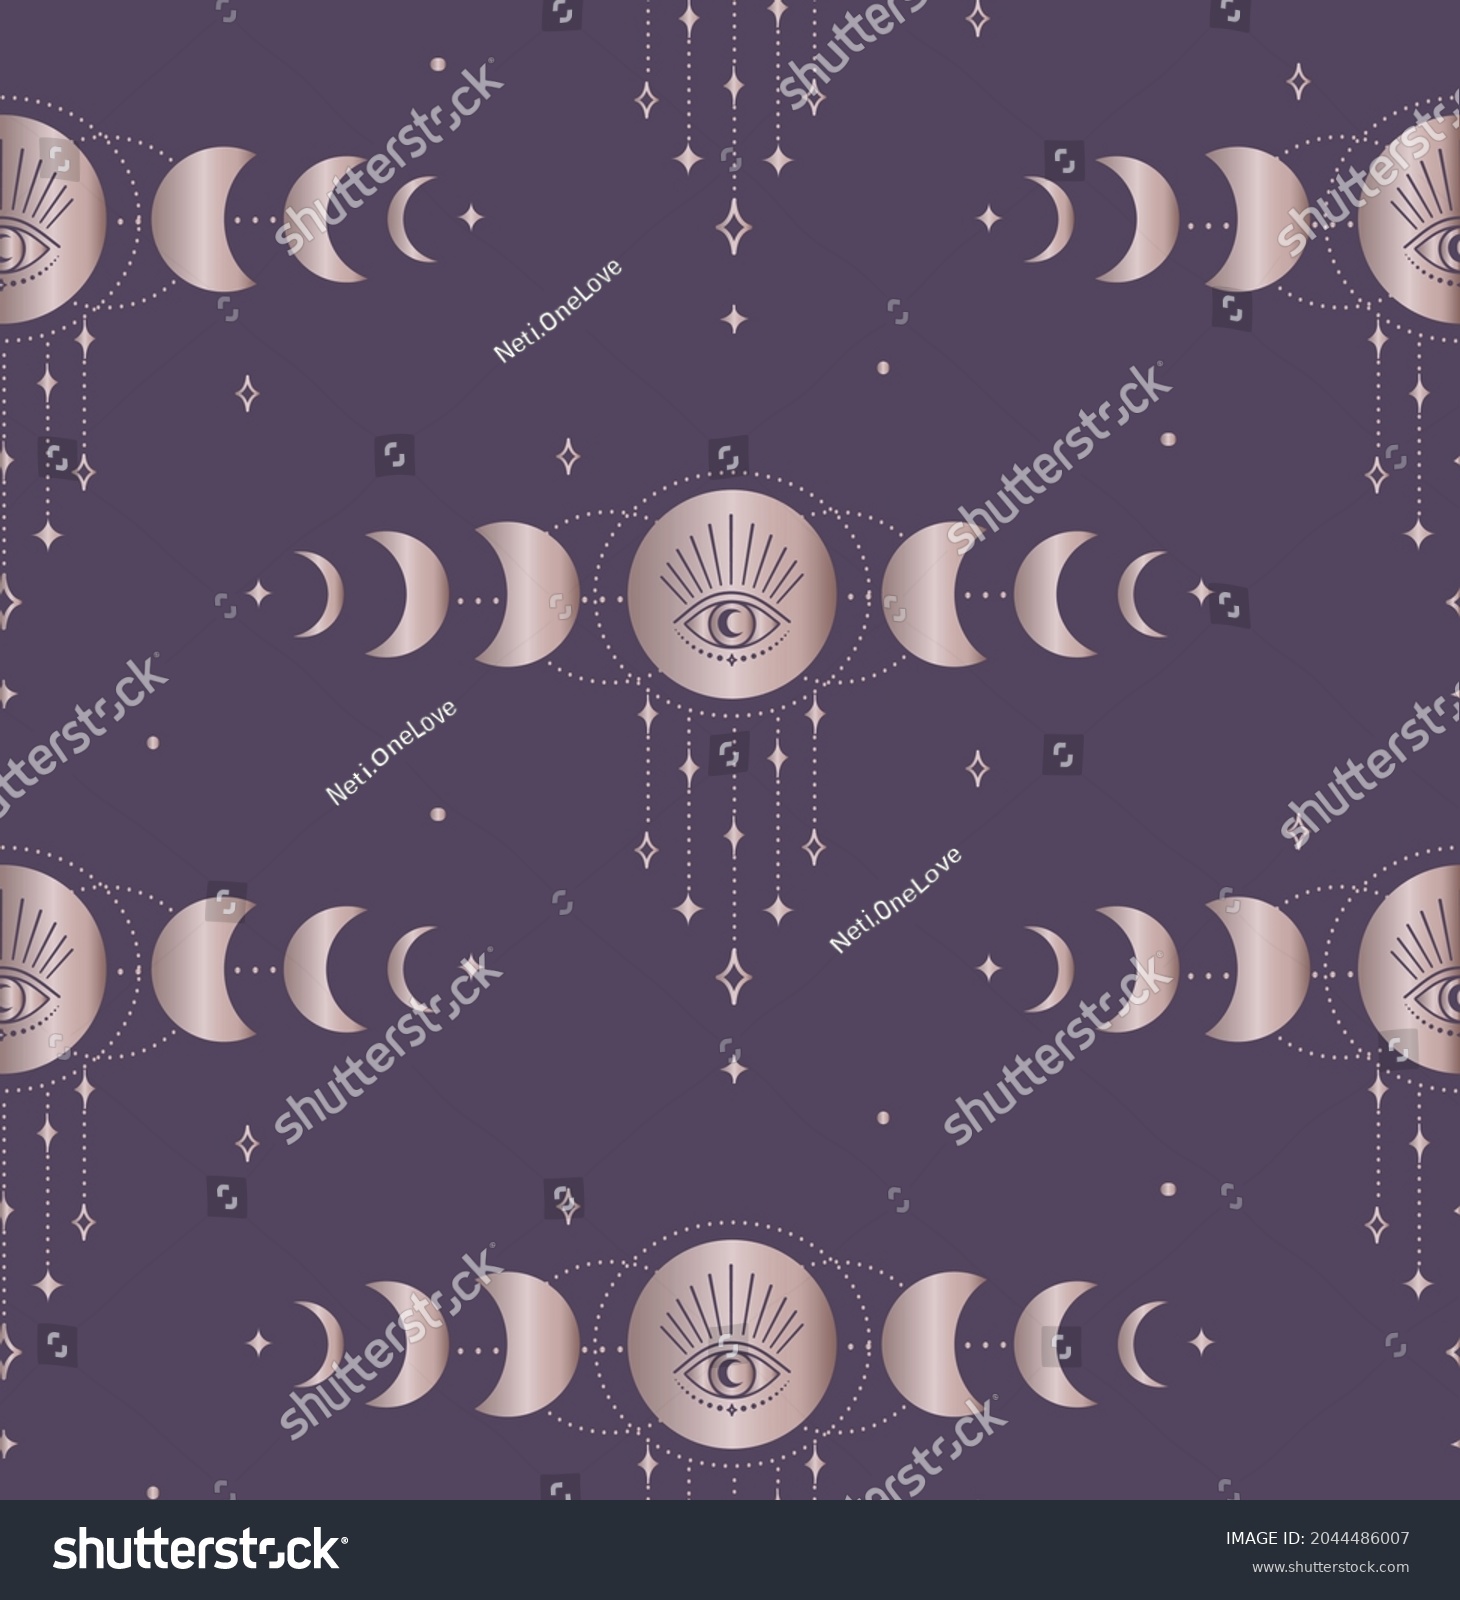 SVG of Abstract Background Seamless Pattern with Moon Phases, Crescents, Stars, Eyes, circles, dots. Mystic Design, Vector Illustration for wrapping tissue paper. Pink Gold svg